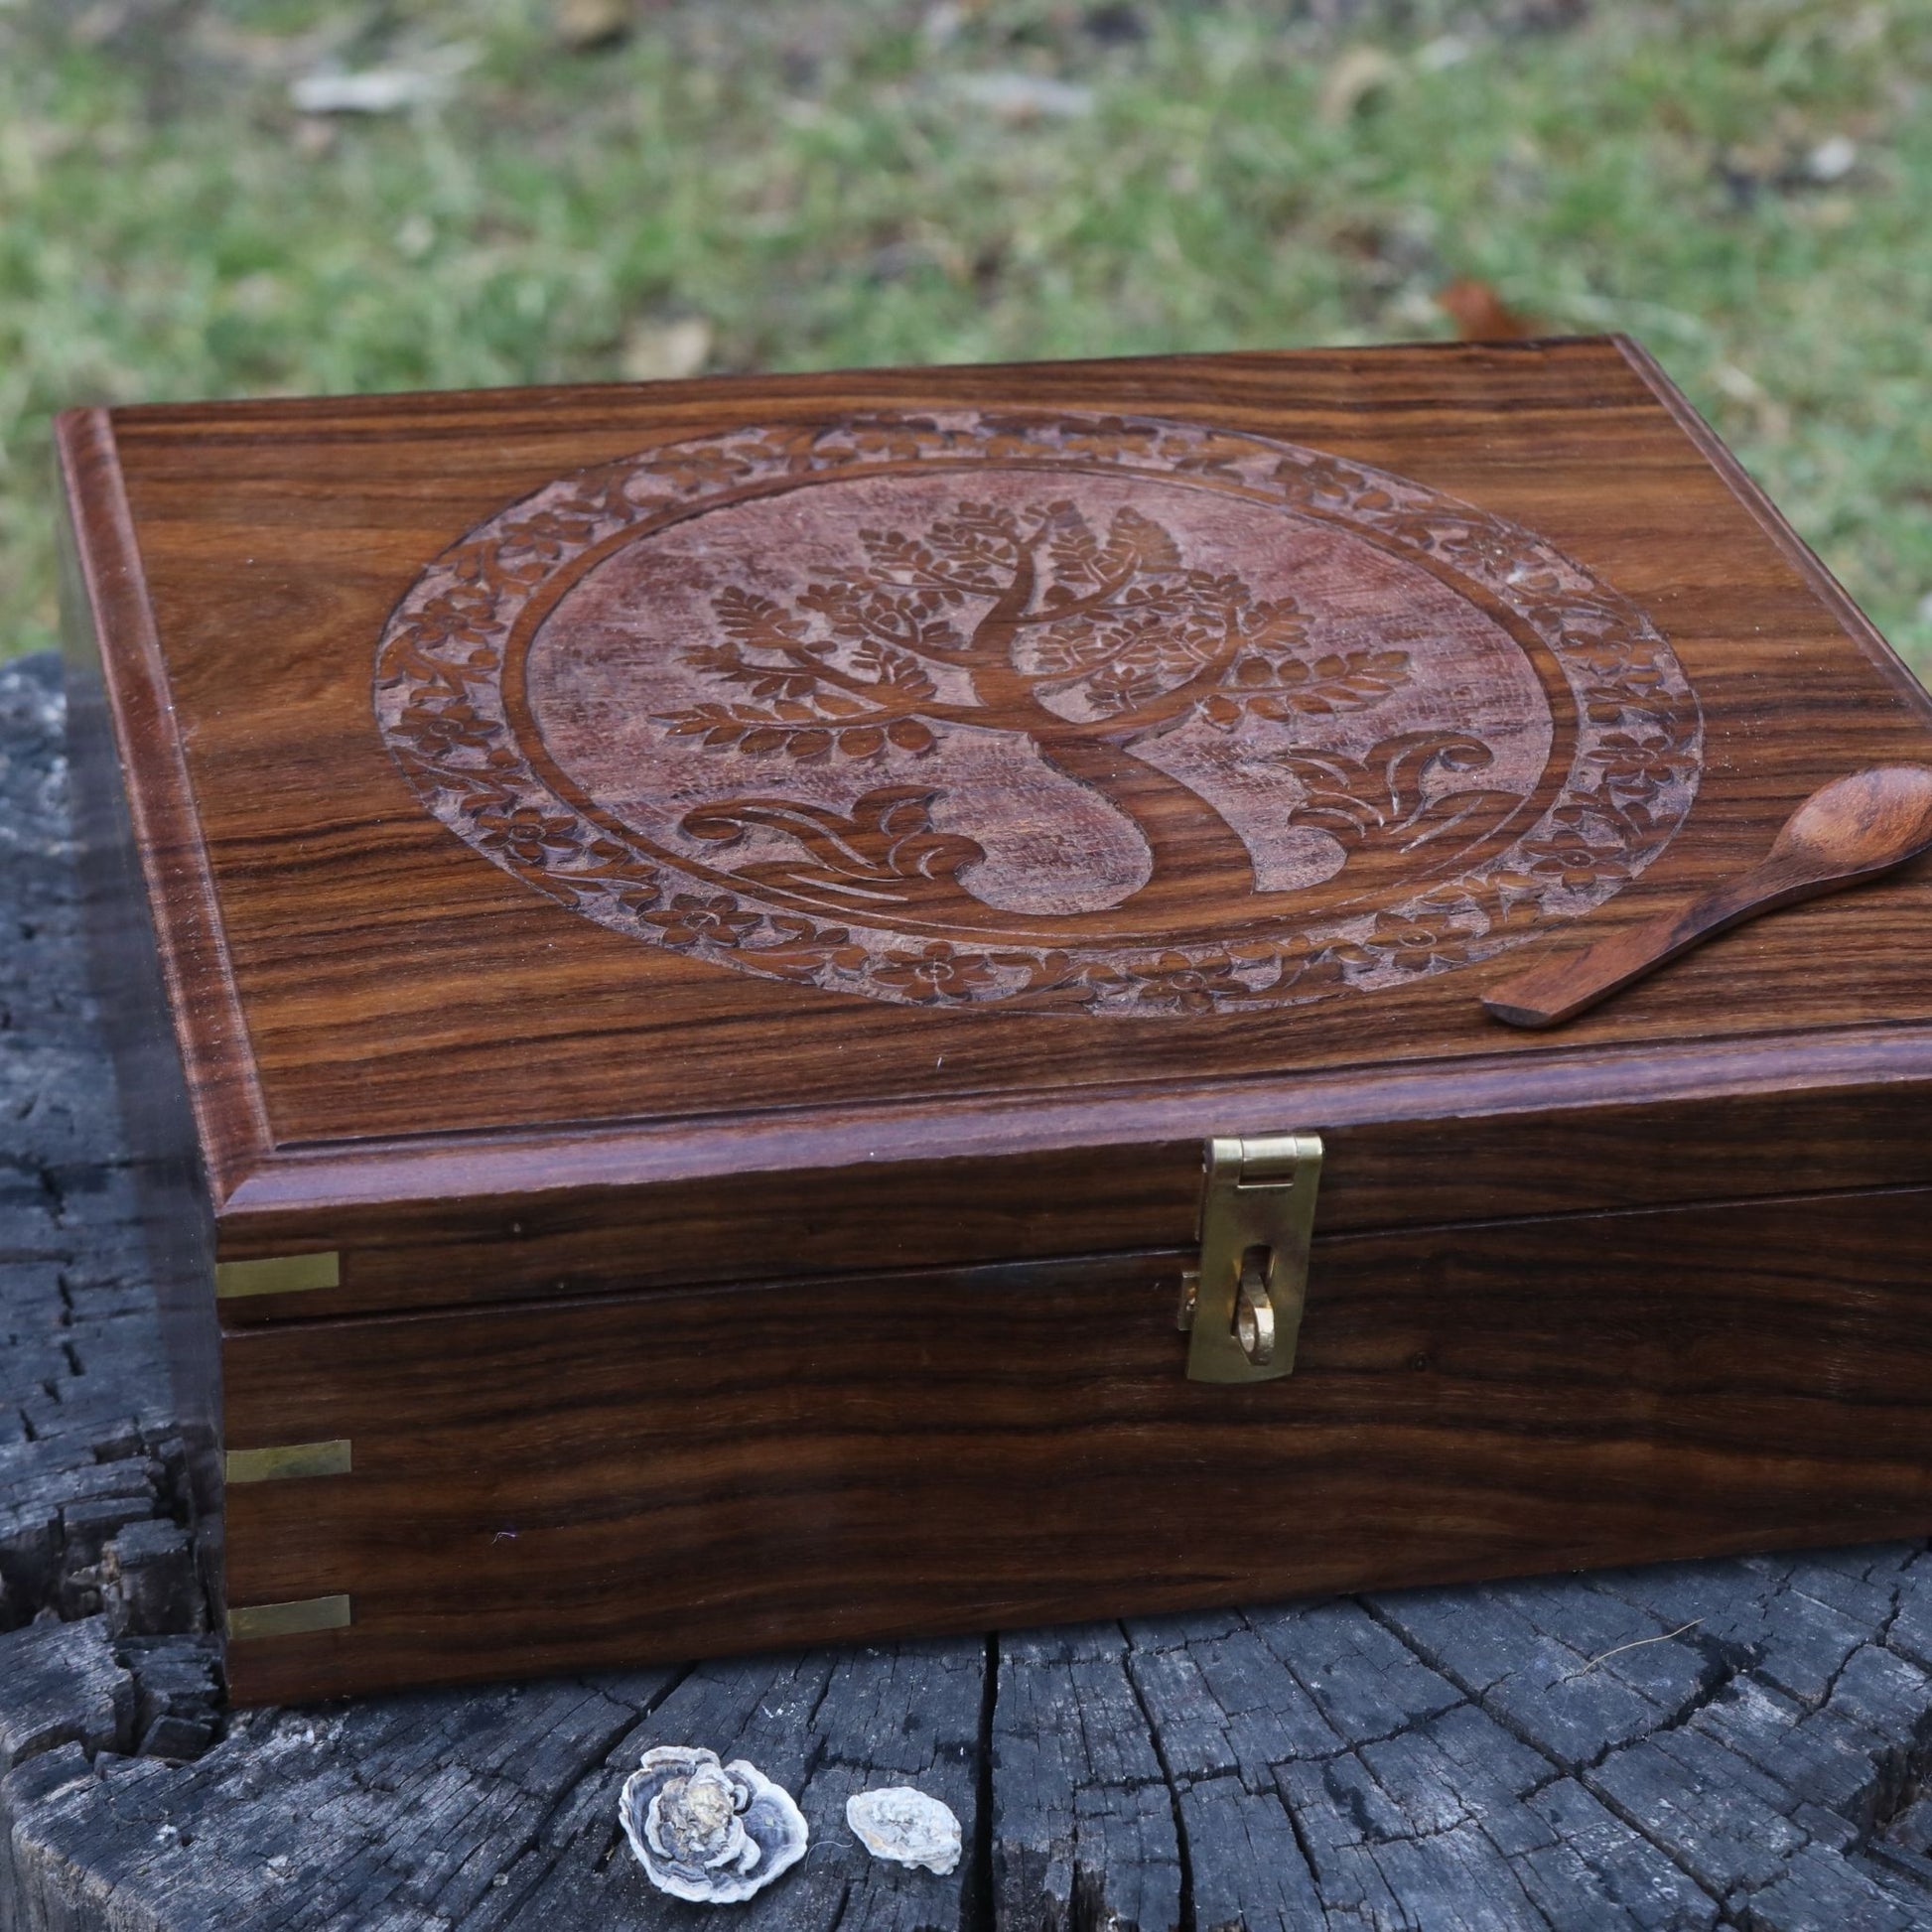 Tree of Life Anayra's Logo Handcarved on Wooden Sheesham Box of Large Size and Large Partitions. 